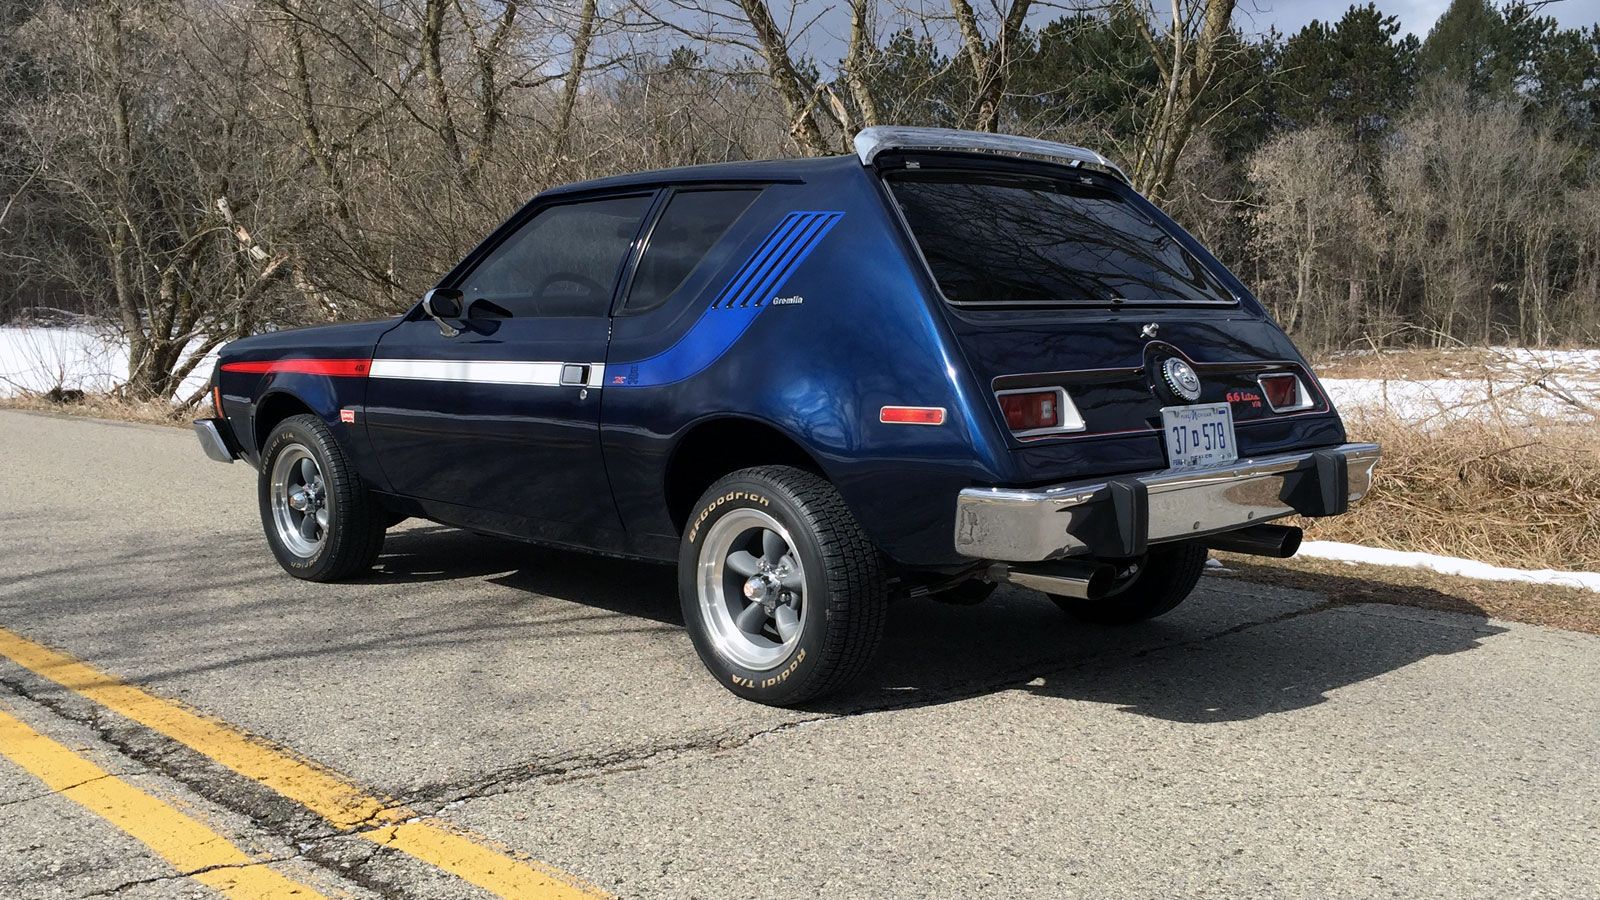 1974 AMC Gremlin 401-XR tribute review: Malaise-era muscle